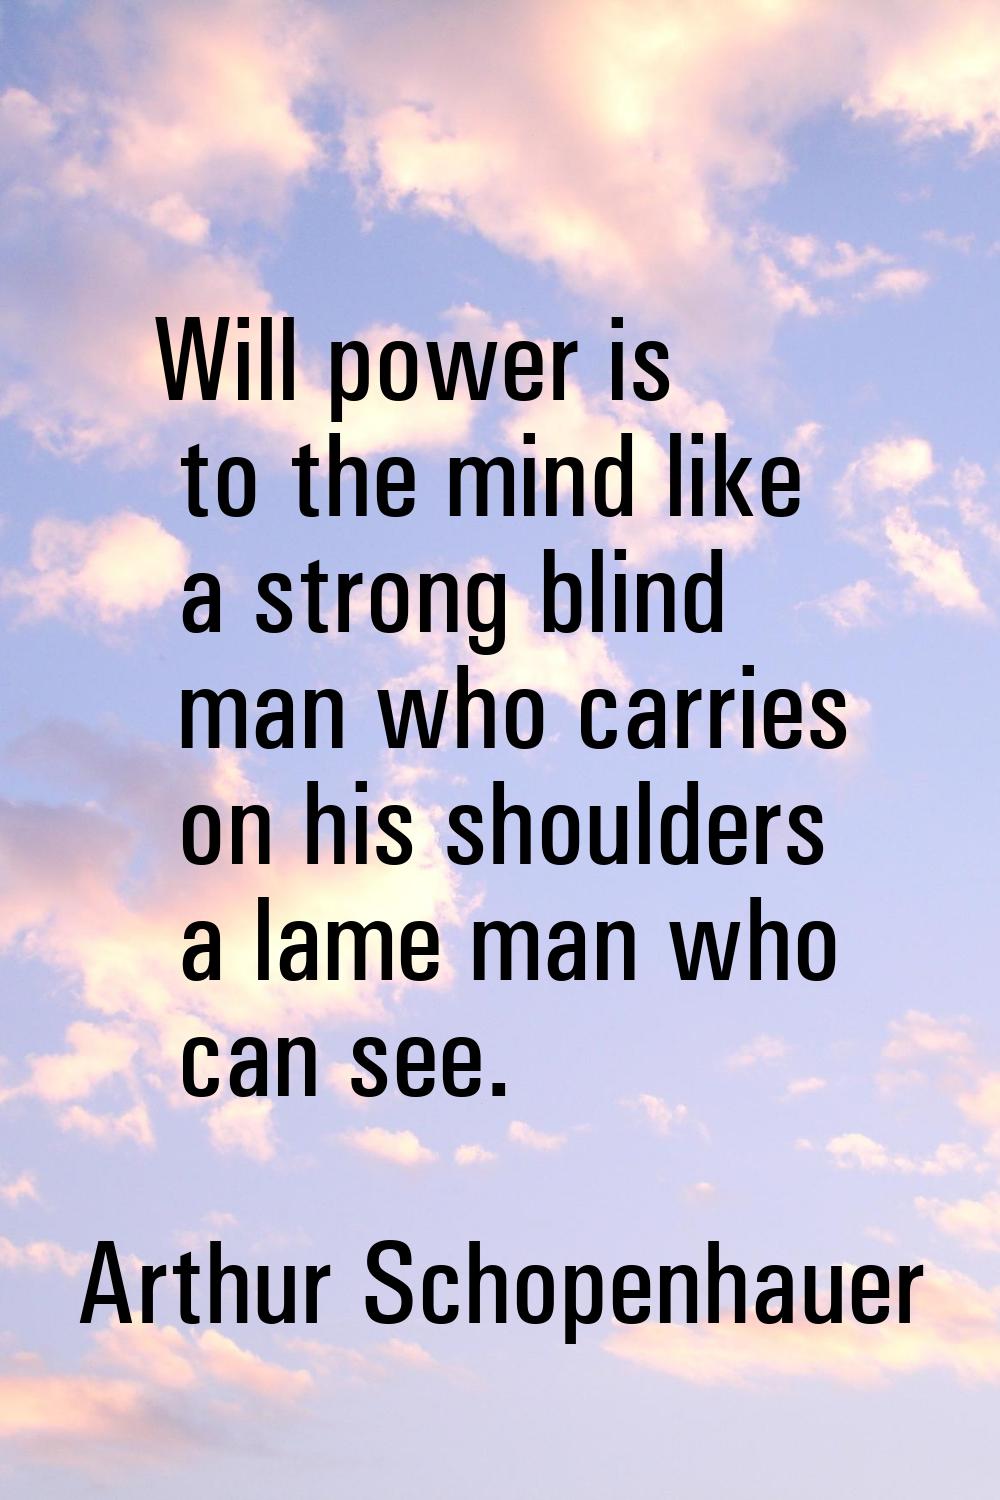 Will power is to the mind like a strong blind man who carries on his shoulders a lame man who can s